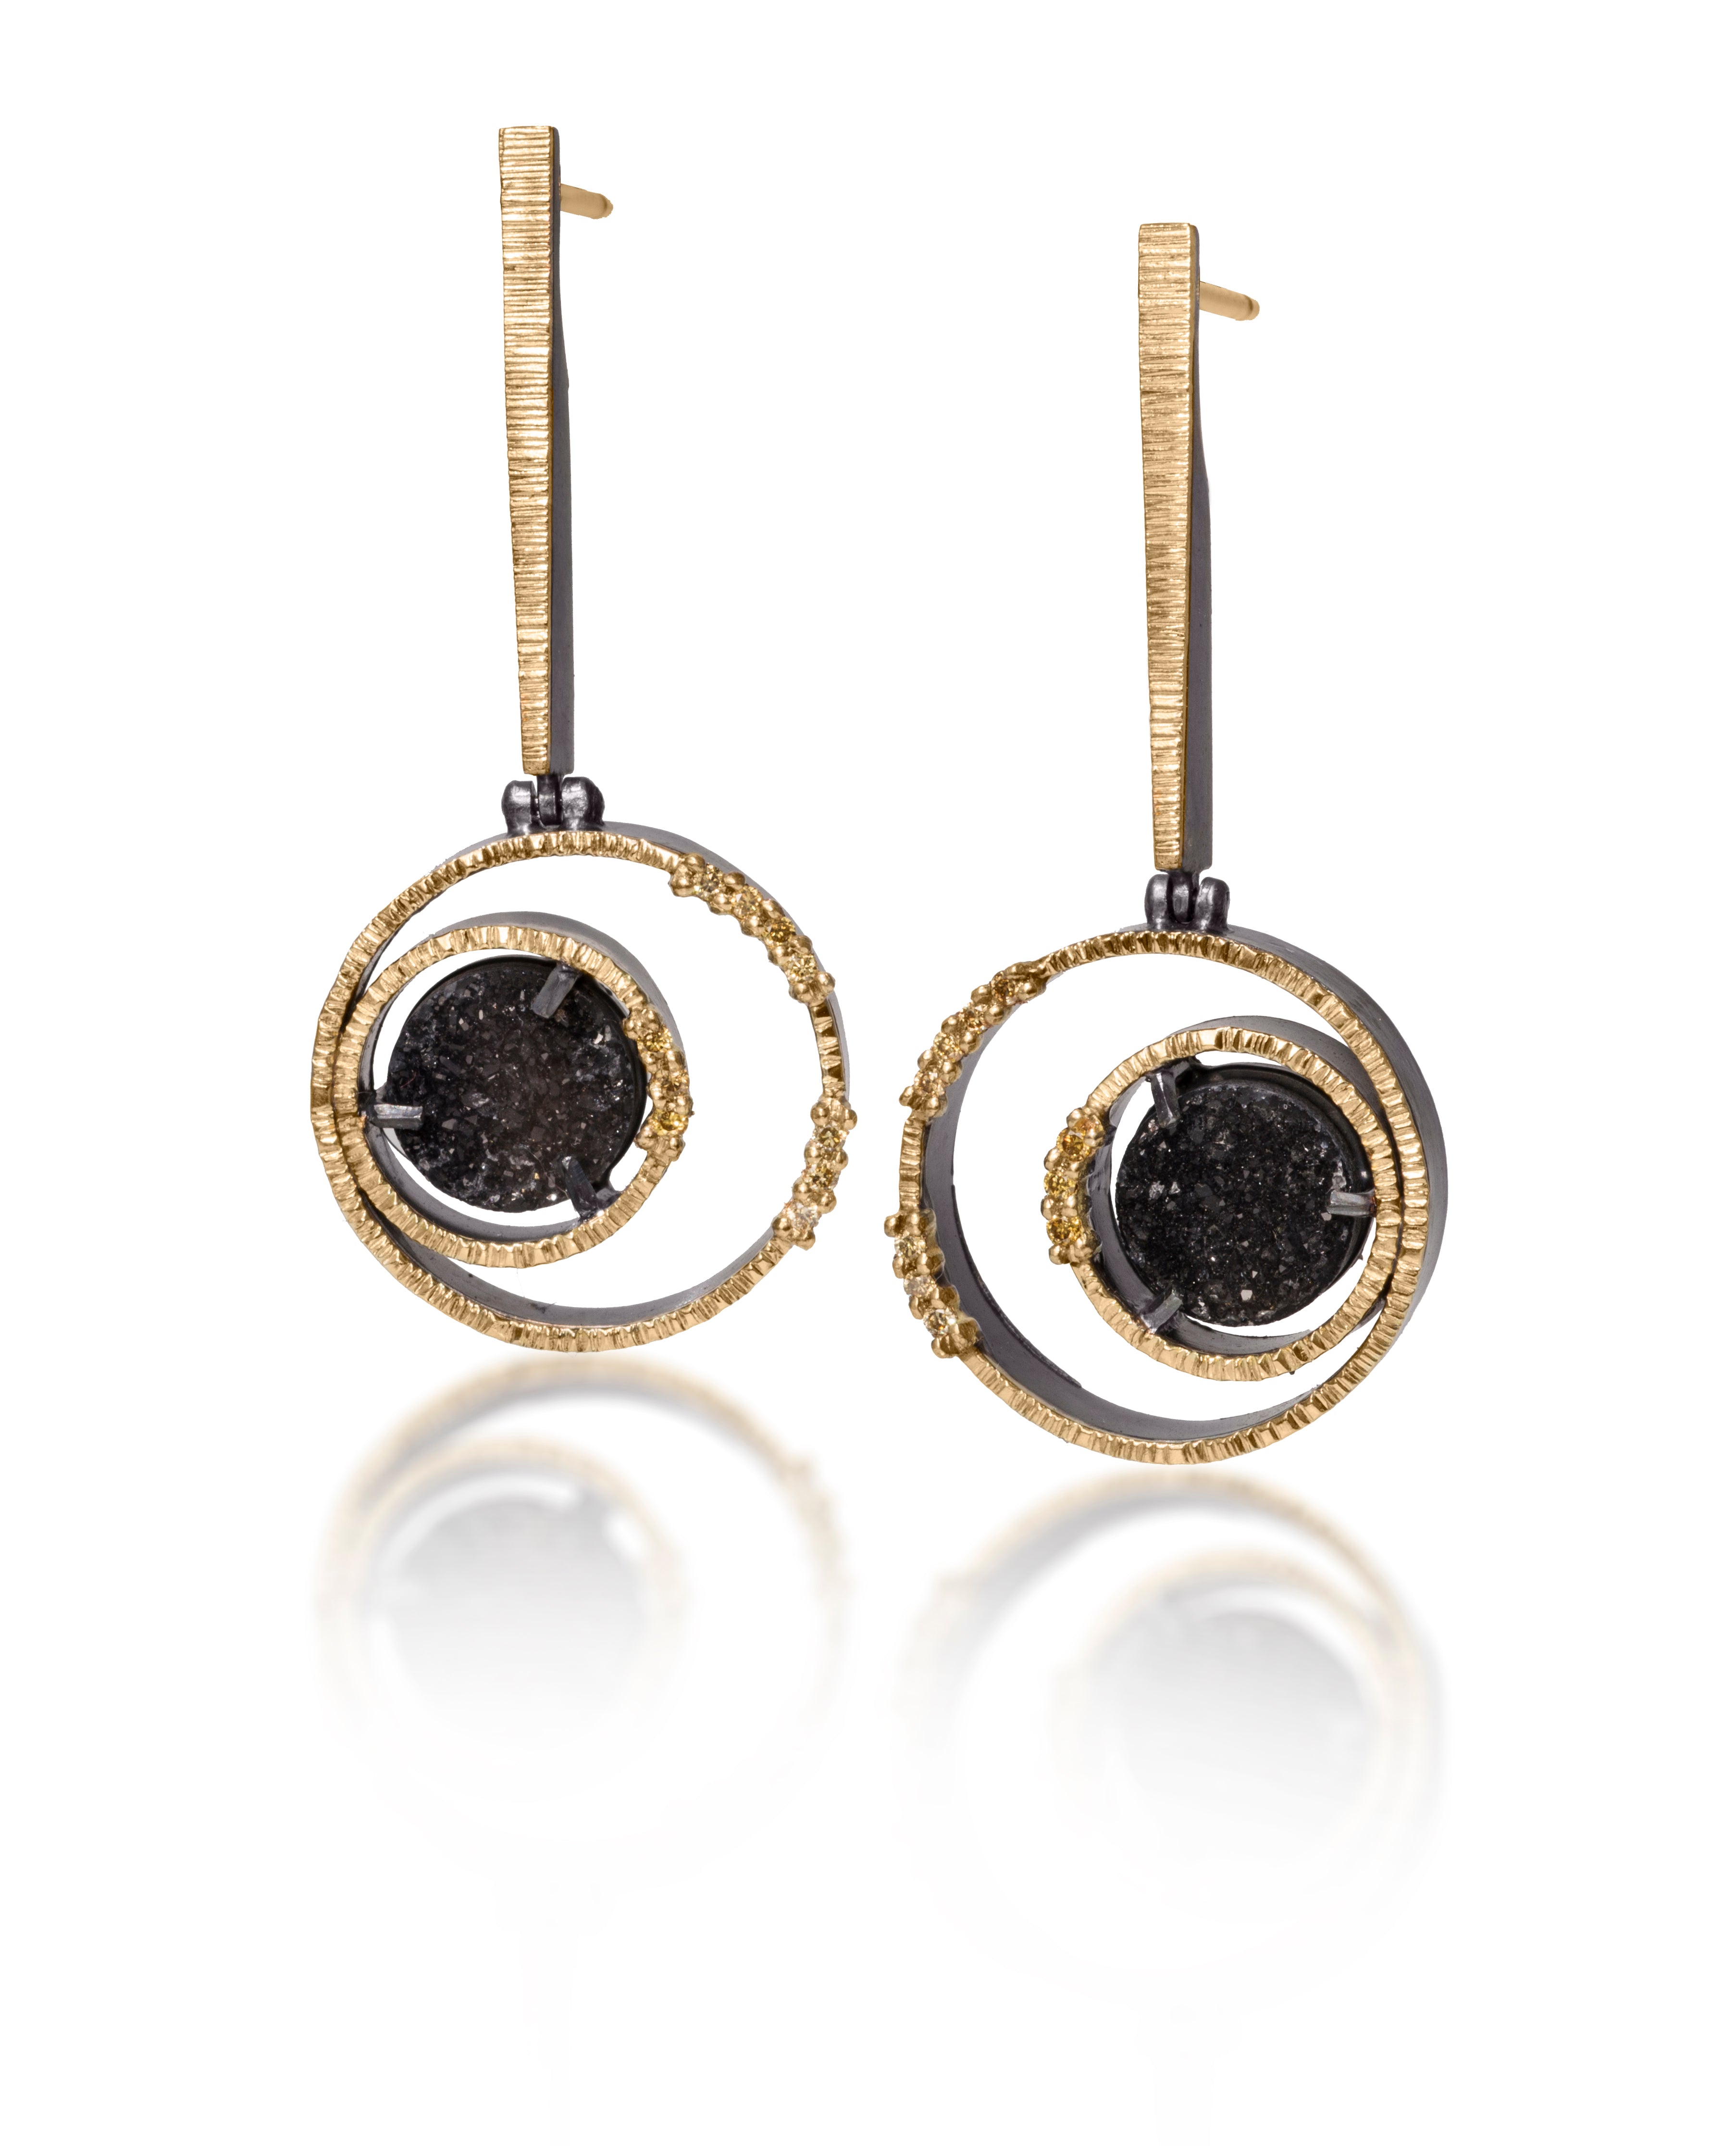 Spiral Earring #1 in 18k gold backed with oxidized sterling silver, prong set black drusy and natural yellow diamonds. Hand fabricated and hammer textured. Flexible hinge and leverbacks. 8mm black drusy.